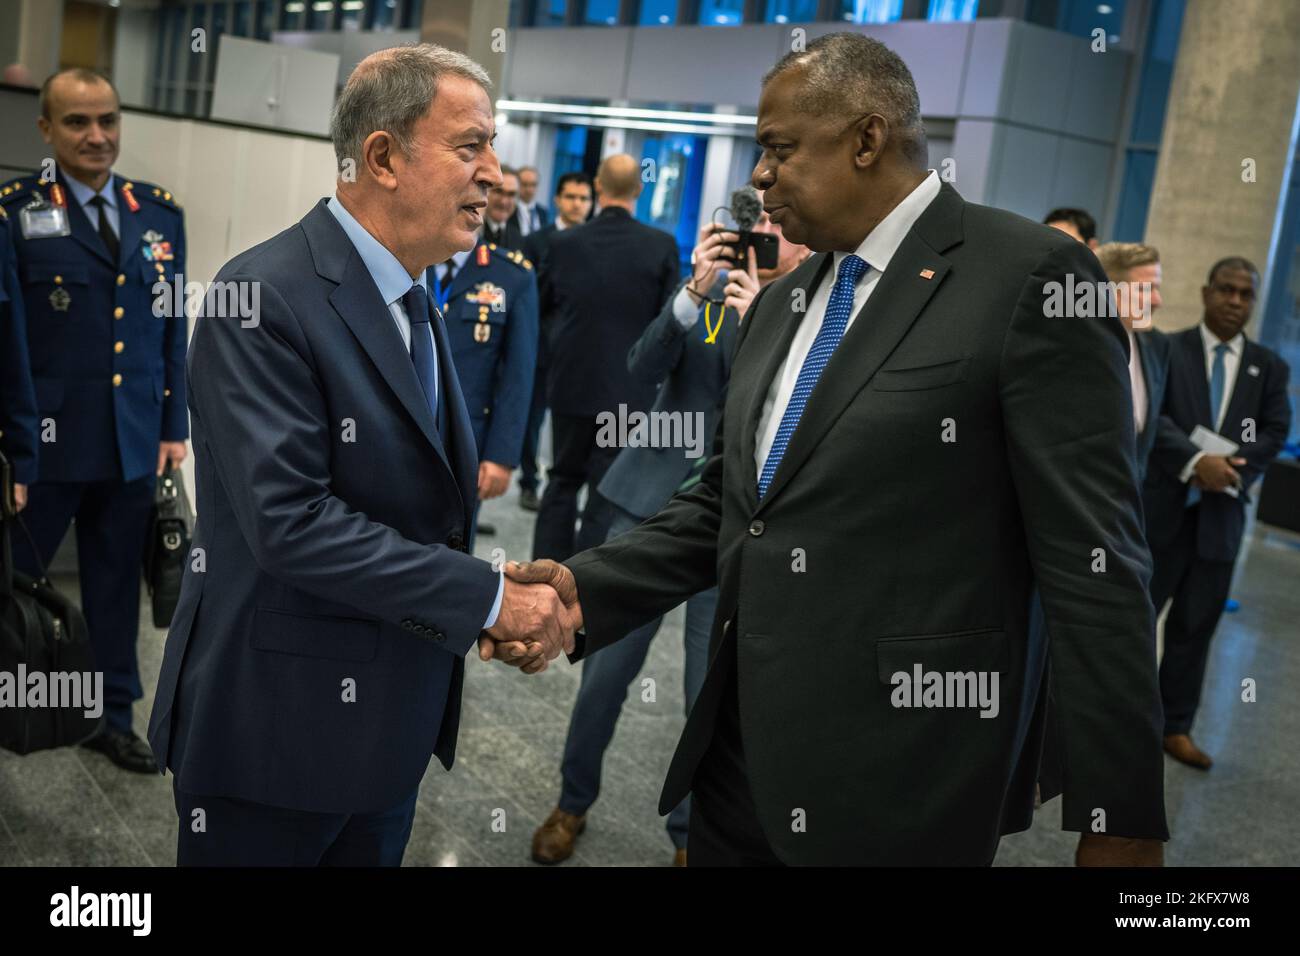 Secretary of Defense Lloyd J. Austin III greets Turkish Minister of National Defense Hulusi Akar at the NATO Defense Ministerial in Brussels, Belgium, Oct. 13, 2022. Austin met with NATO defense leaders to discuss the implementation of decisions made at the Madrid Summit in June and steps the Alliance is taking to meet evolving security needs. Stock Photo